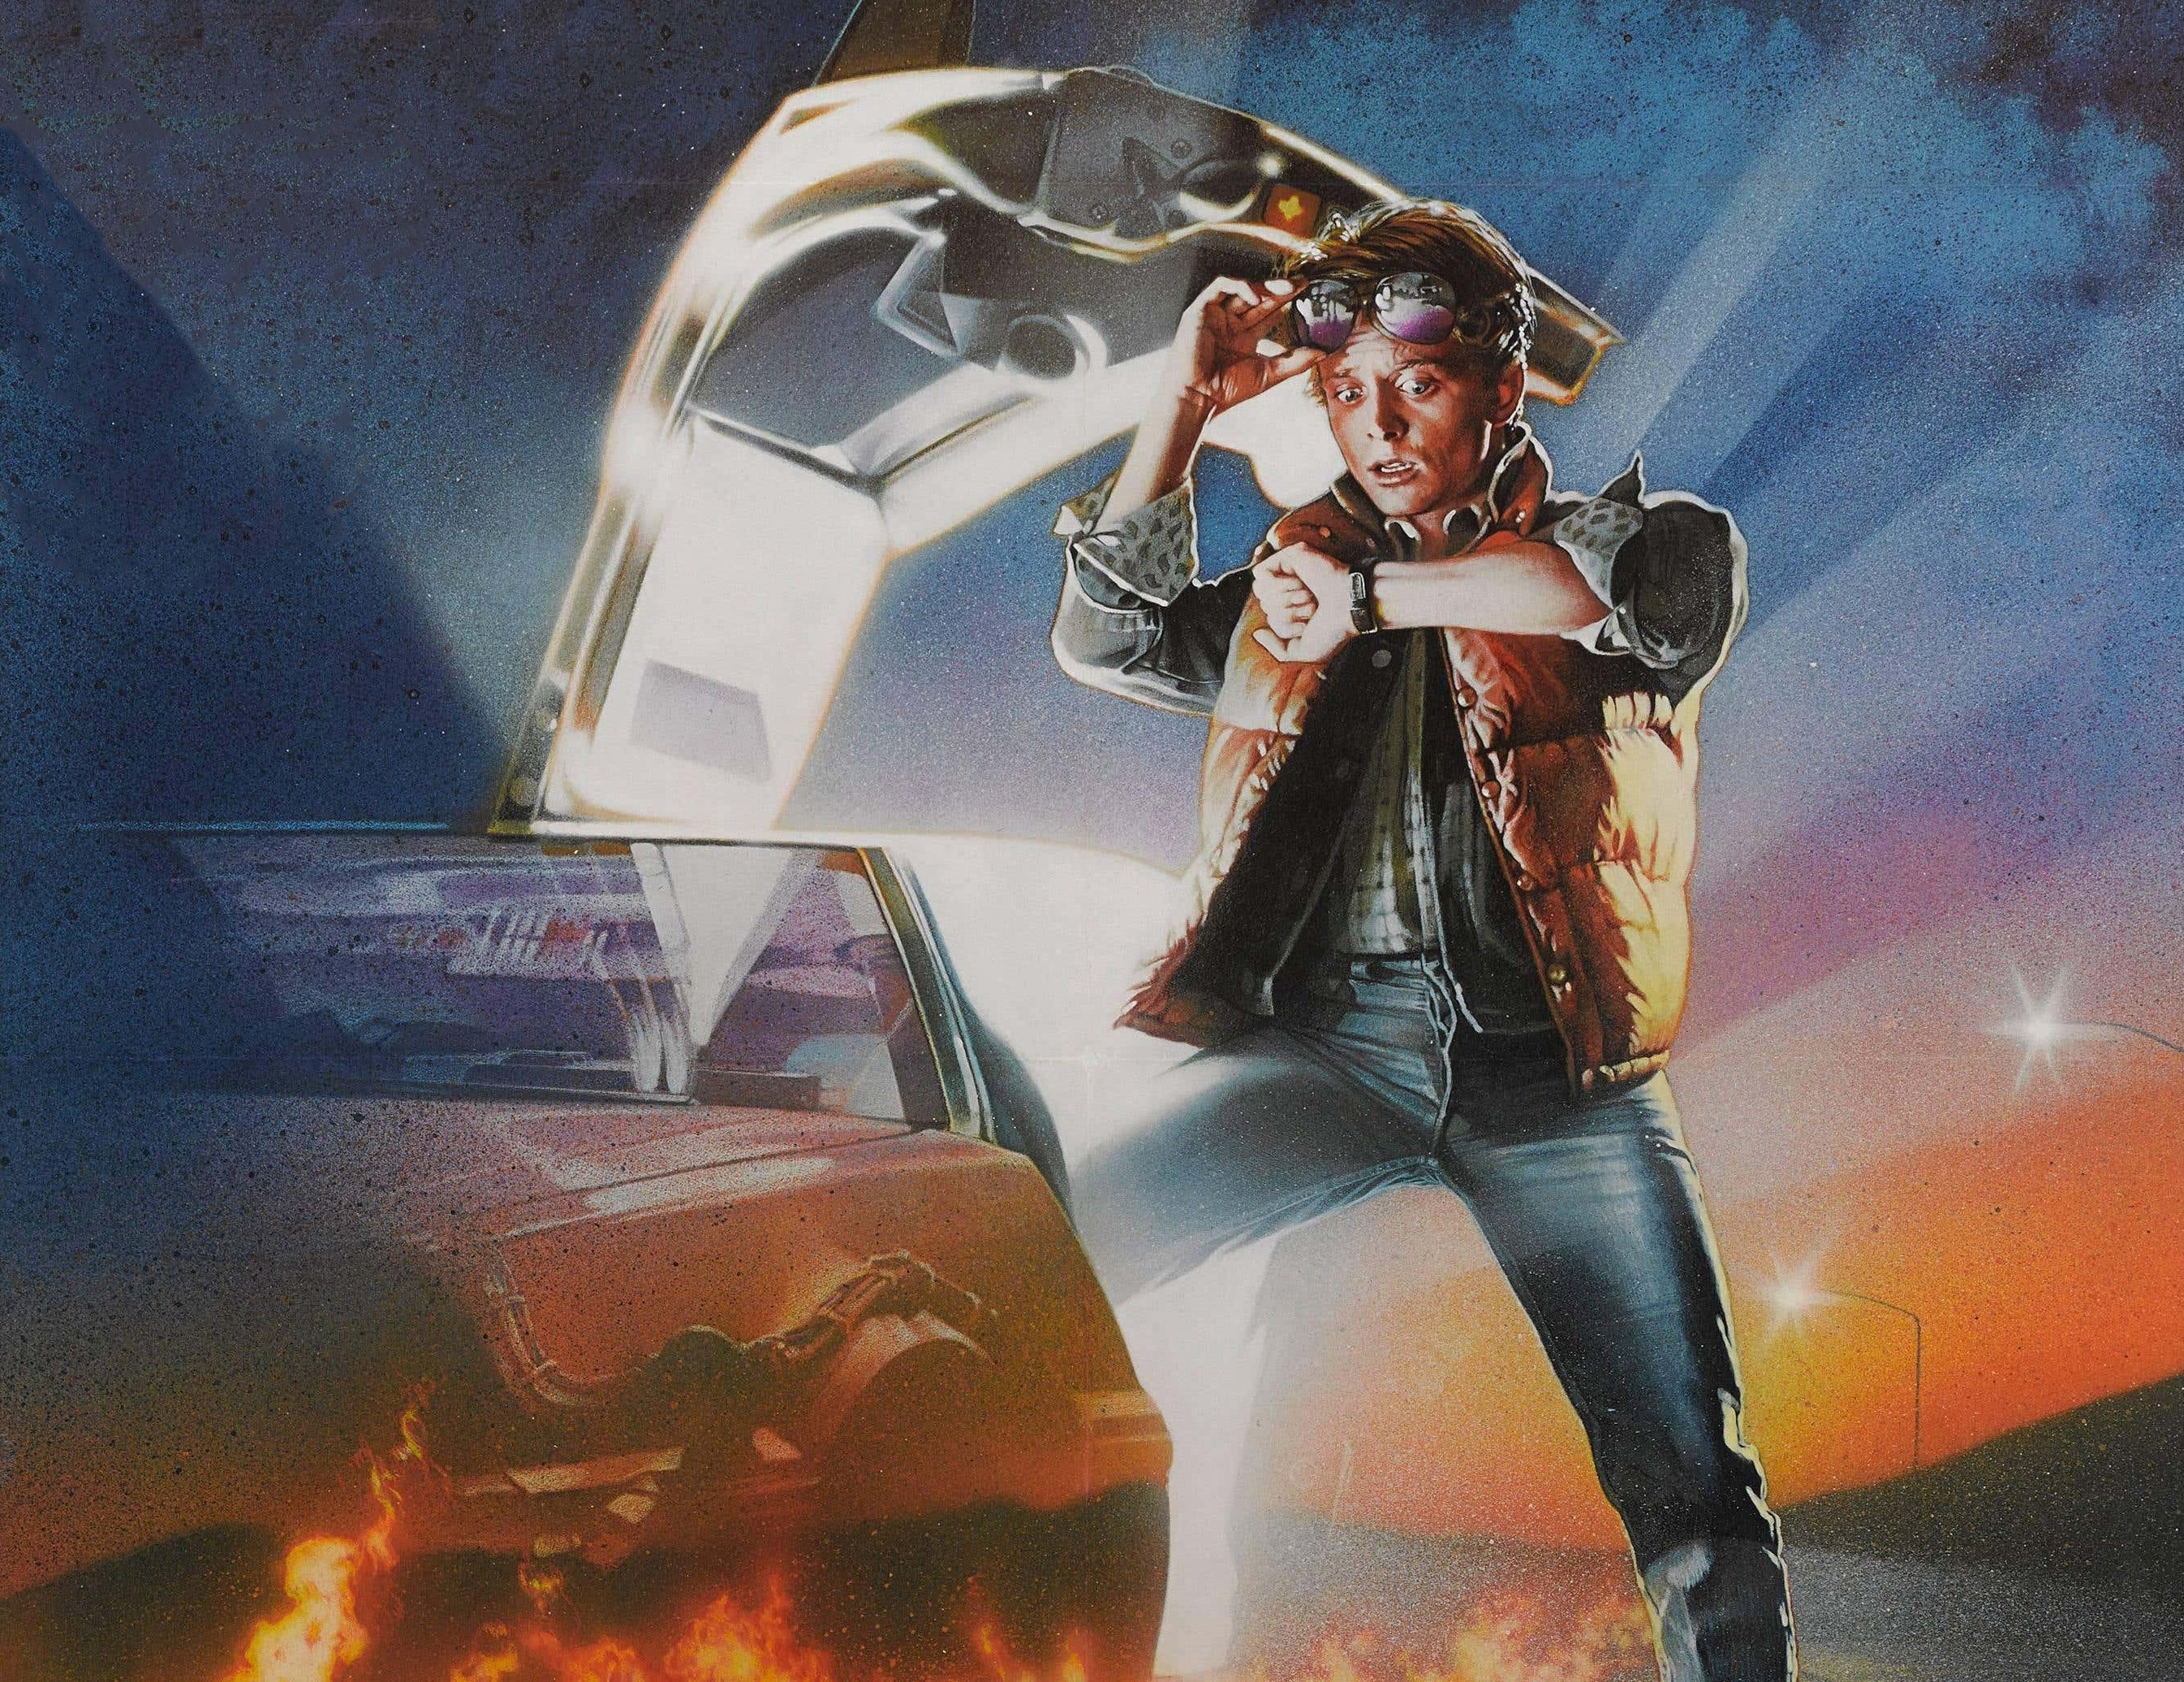 back to the future, movie, marty mcfly, michael j fox